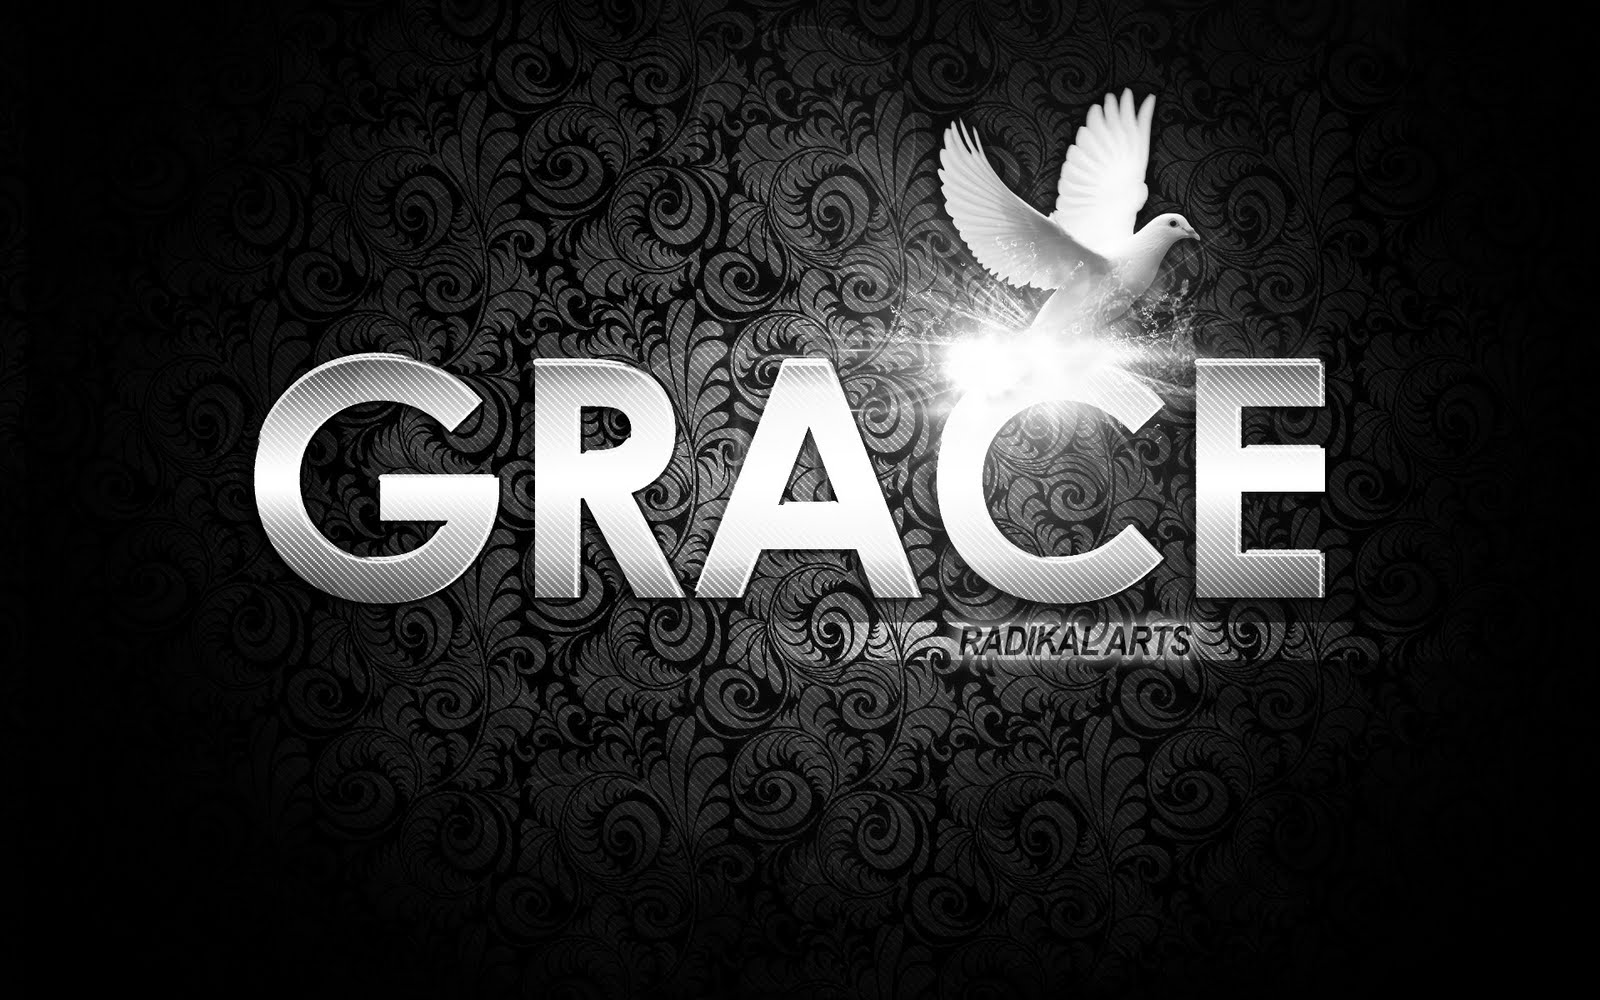  Verse Greetings Card Wallpapers Free Grace Christian Wallpapers